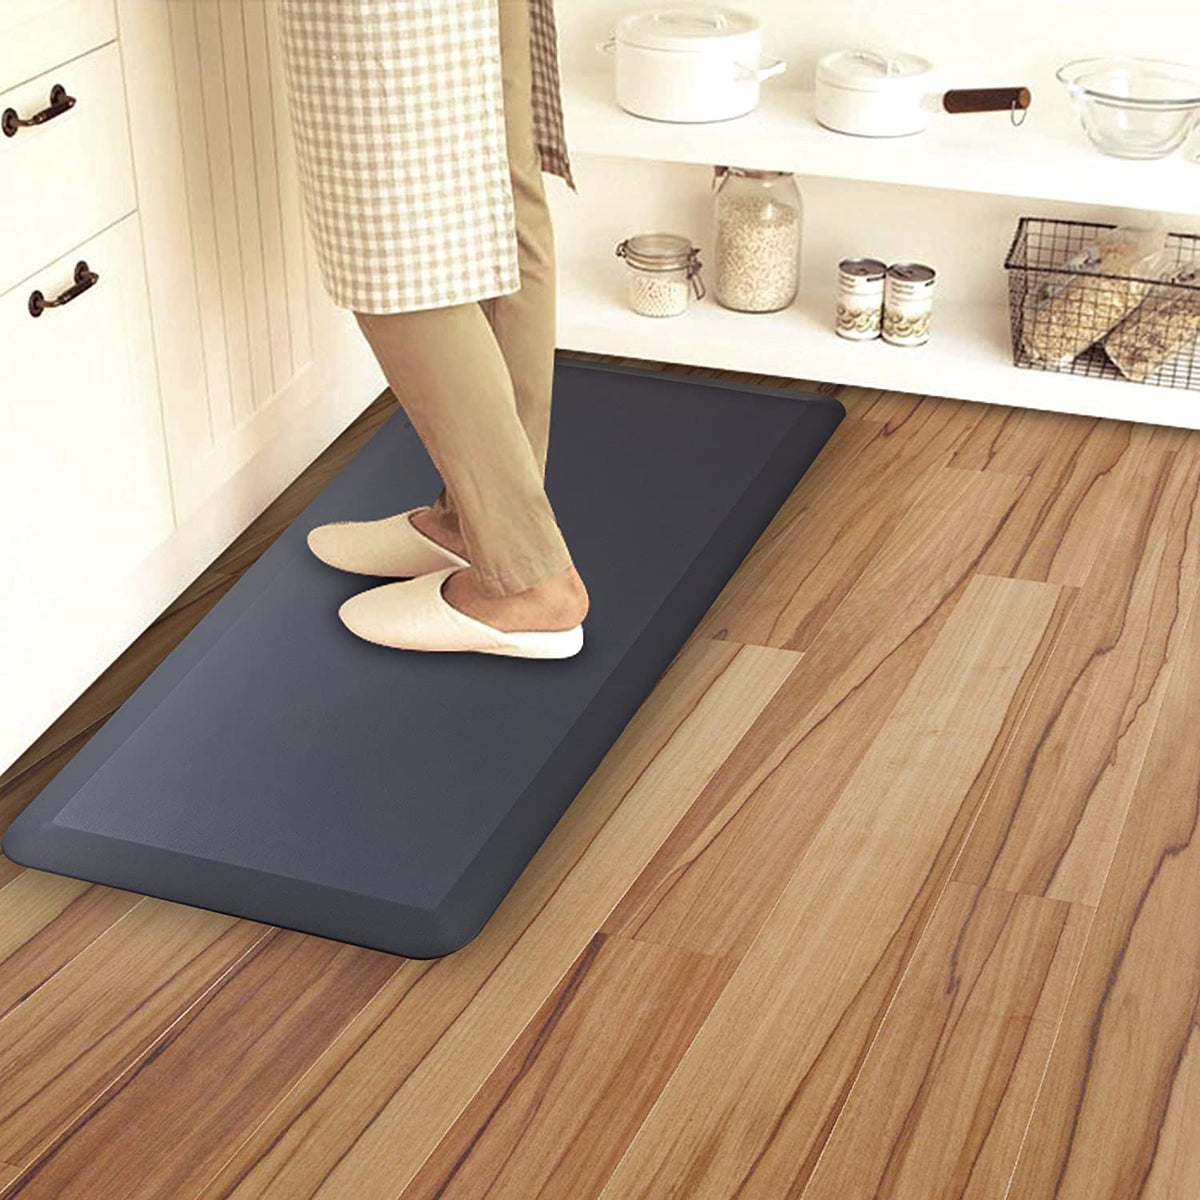  DEXI Anti Fatigue Kitchen Mat, 3/4 Inch Thick, Stain